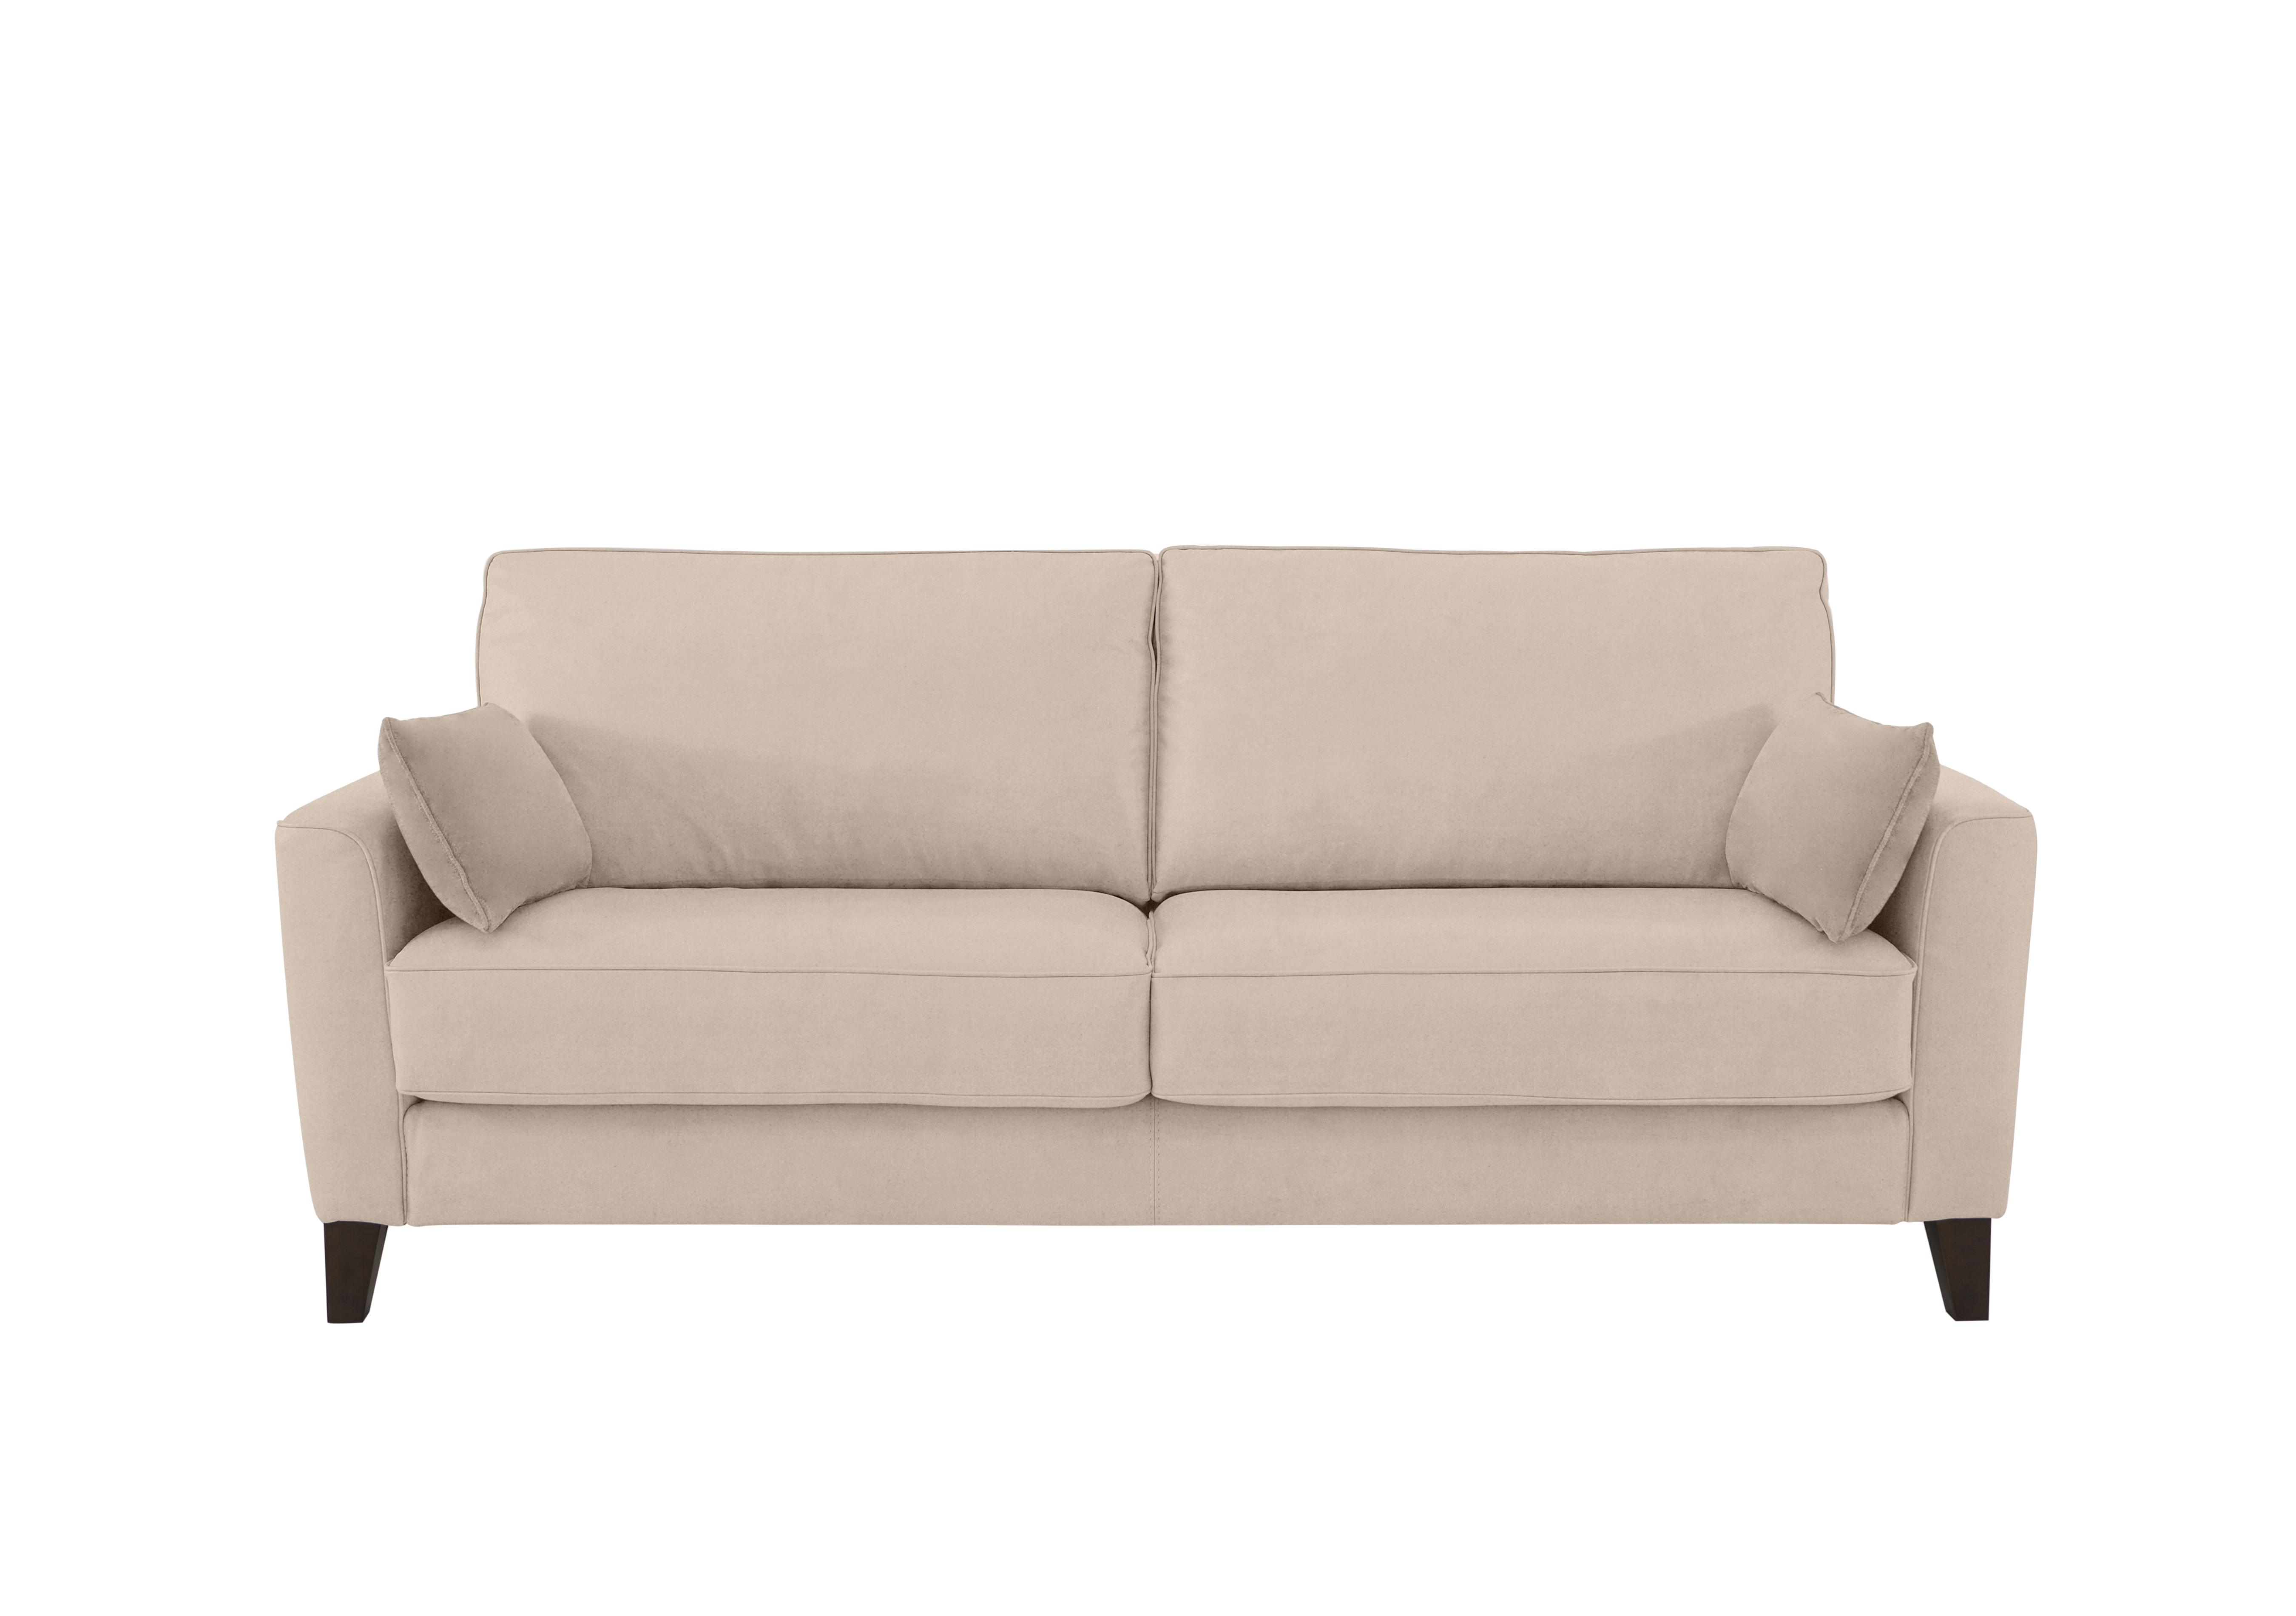 Brondby 3 Seater Fabric Sofa in Bfa-Blj-R20 Bisque on Furniture Village